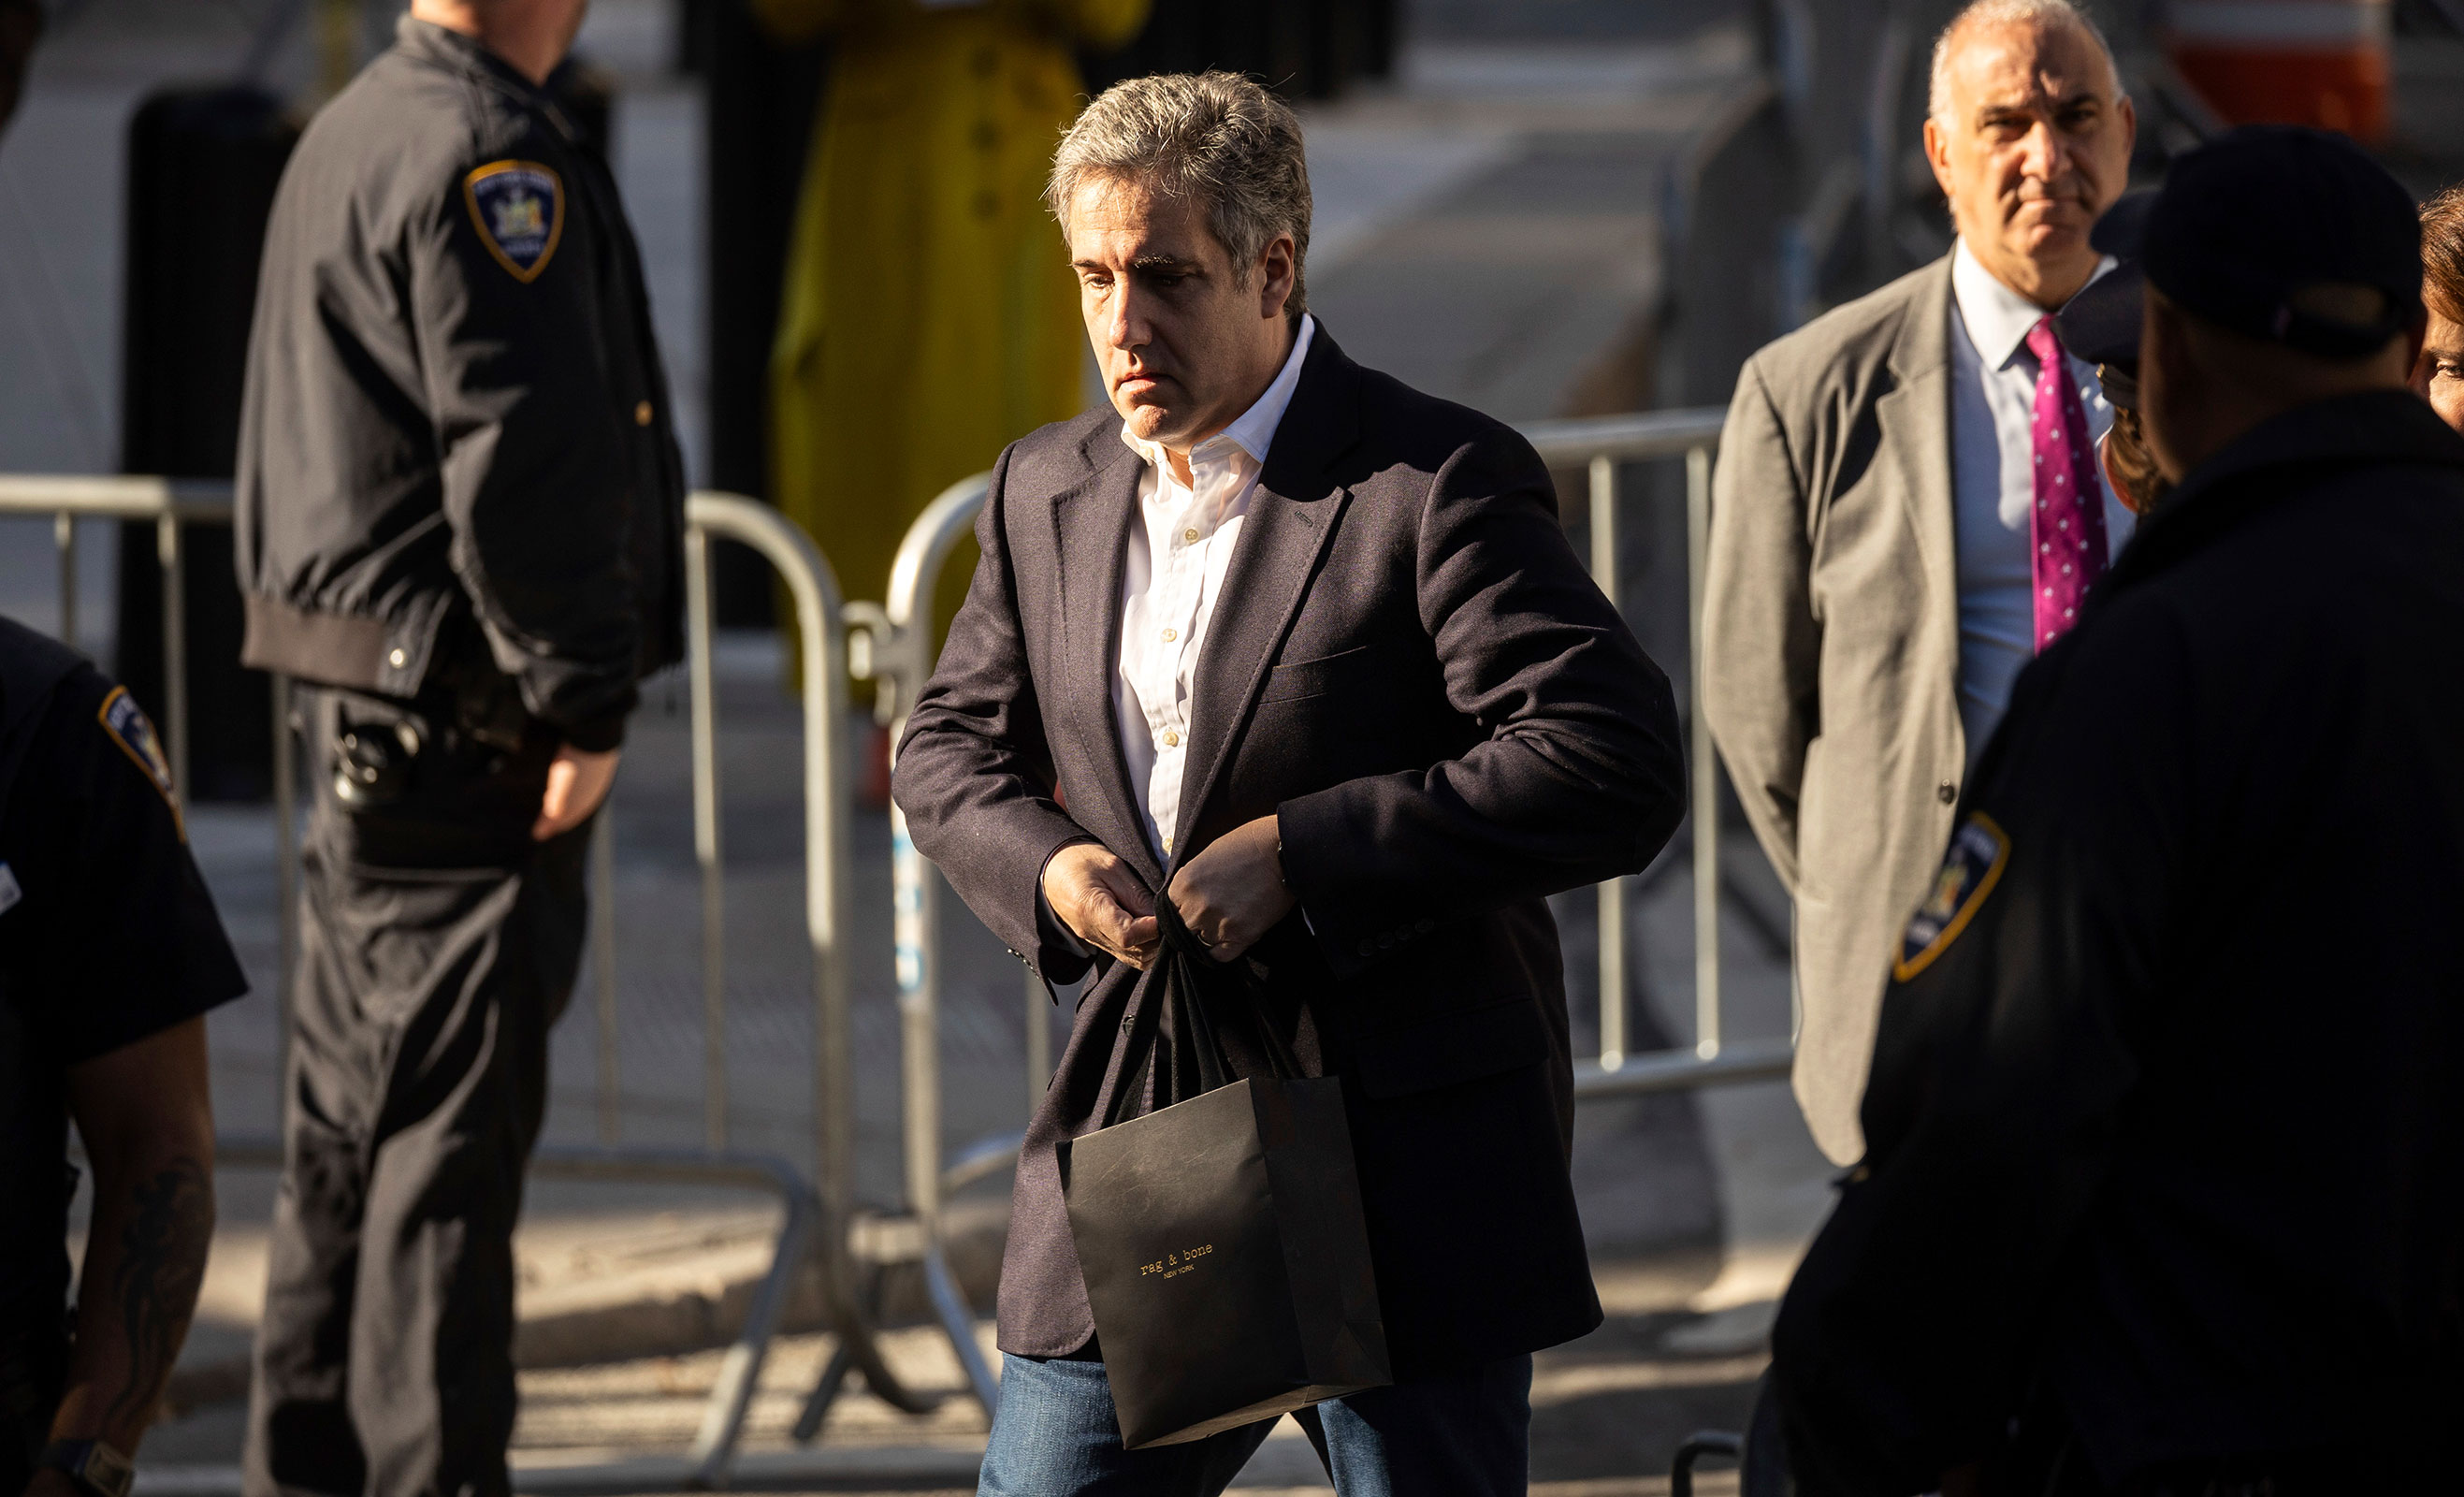 Michael Cohen arrives at New York Supreme Court for former President Donald Trump's civil business fraud trial on Wednesday in New York.